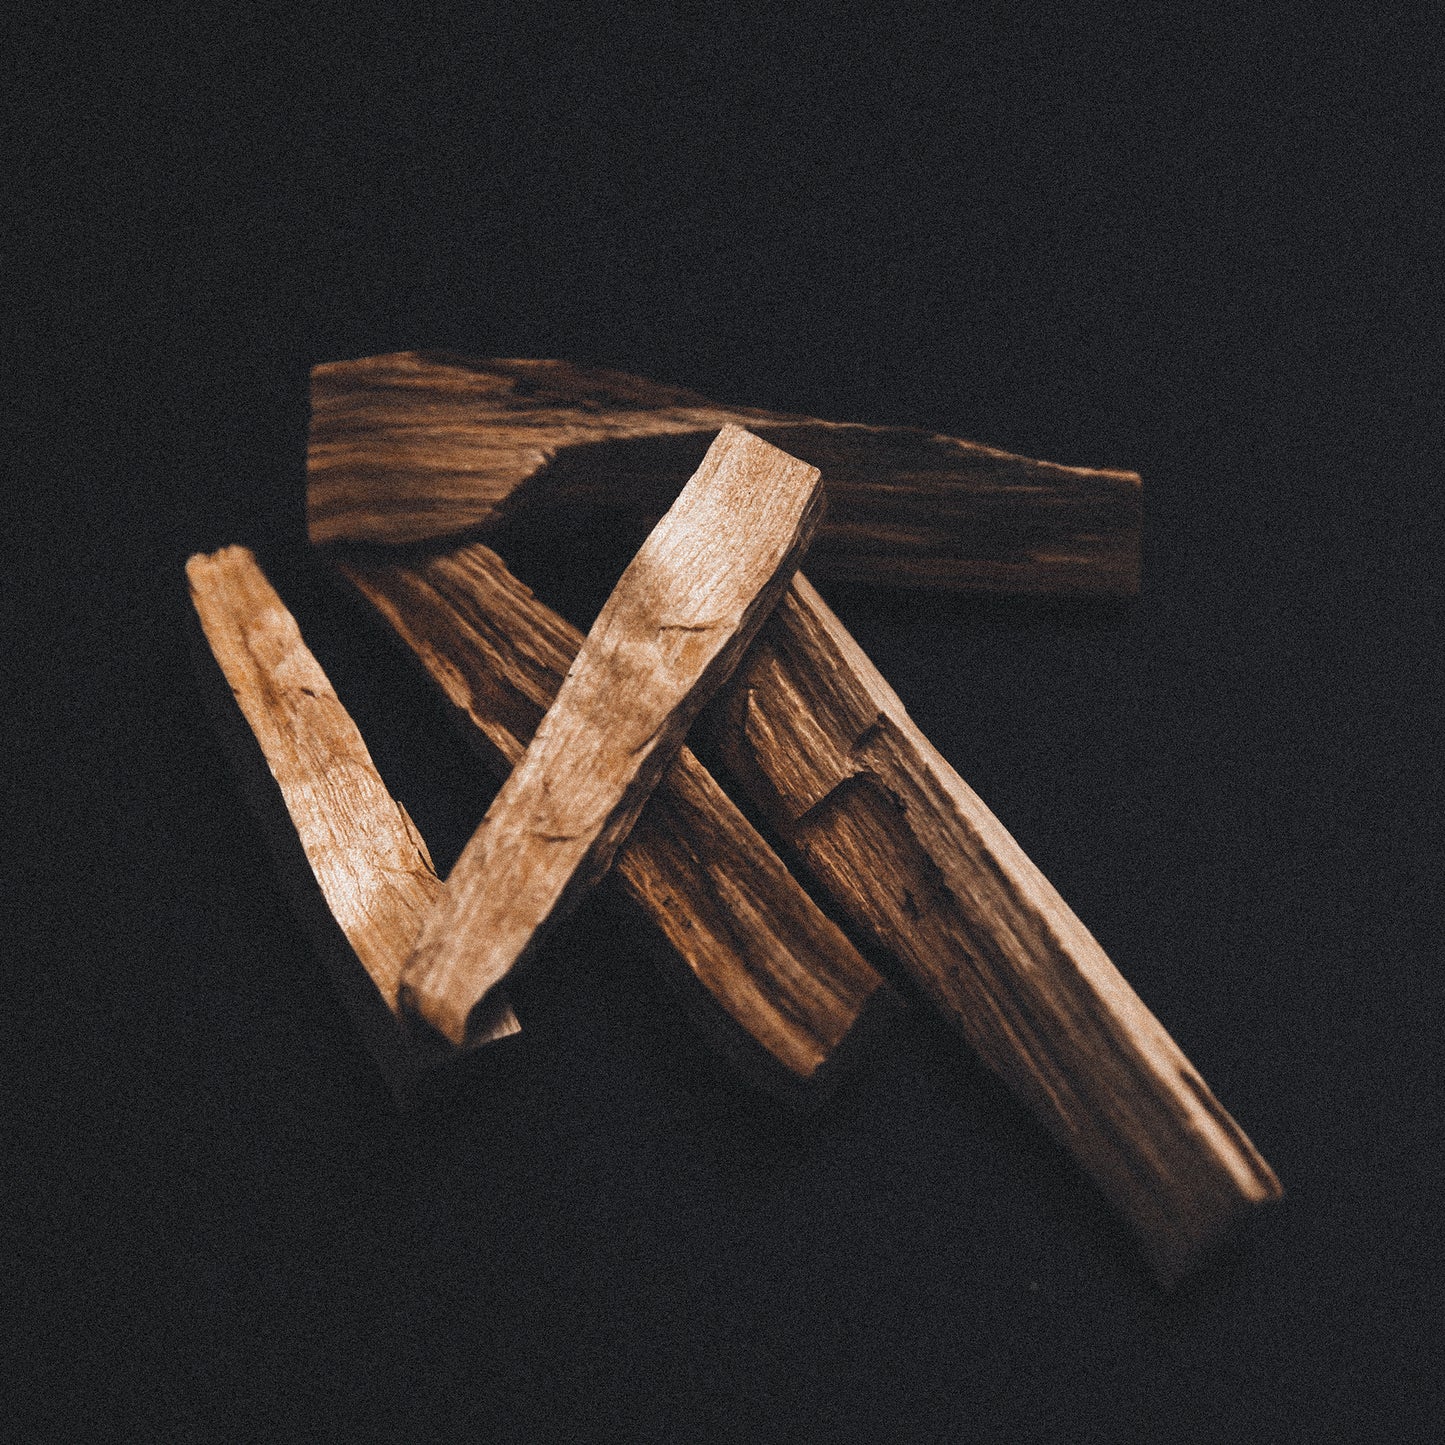 The Somebody Wood Collection